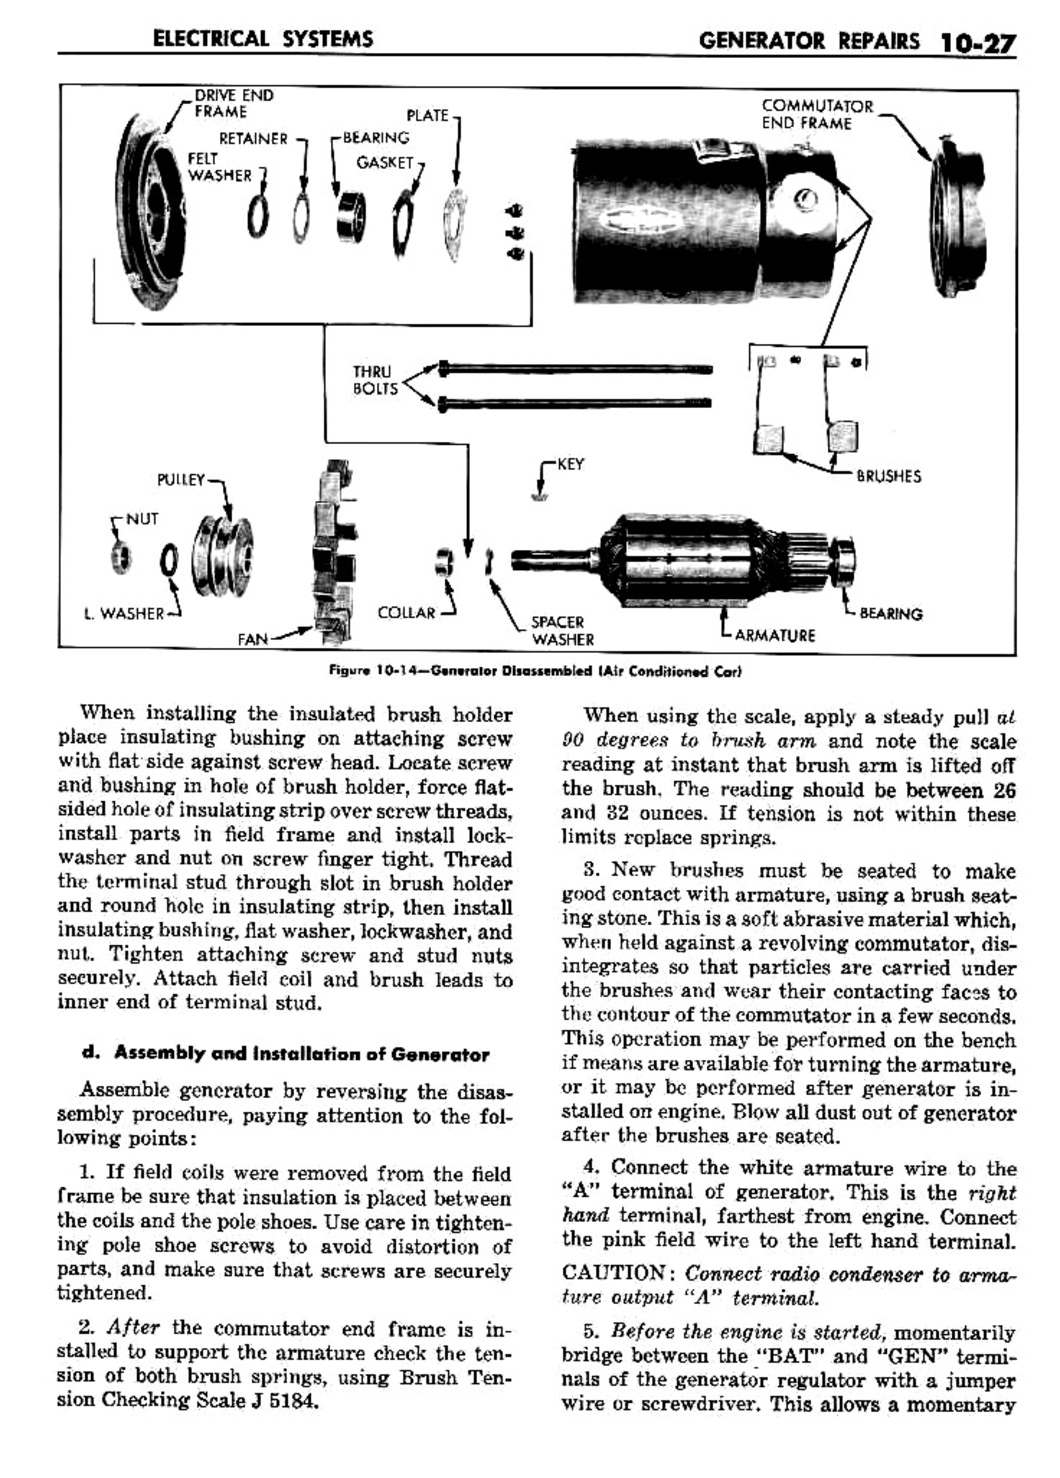 n_11 1960 Buick Shop Manual - Electrical Systems-027-027.jpg